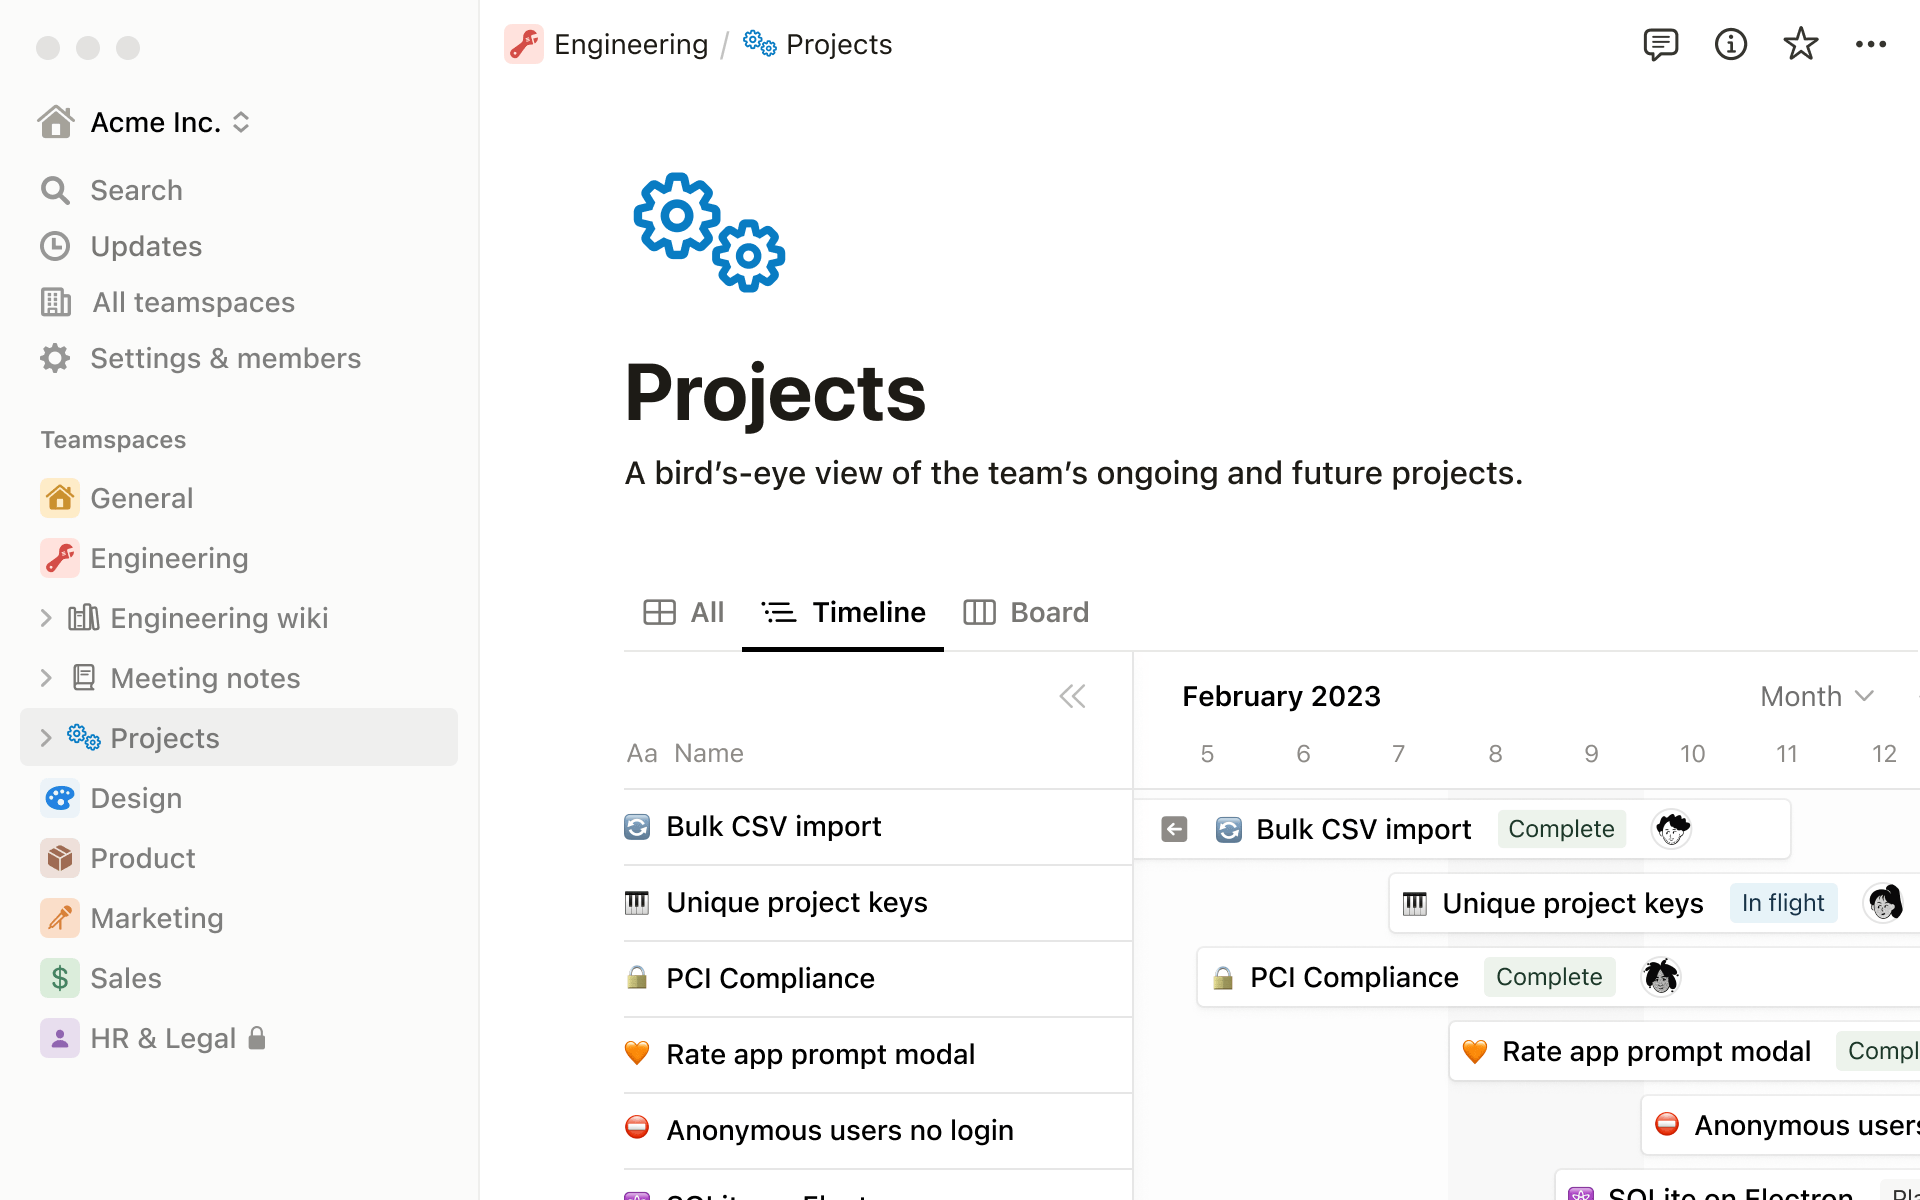 Your connected workspace for wiki, docs & projects